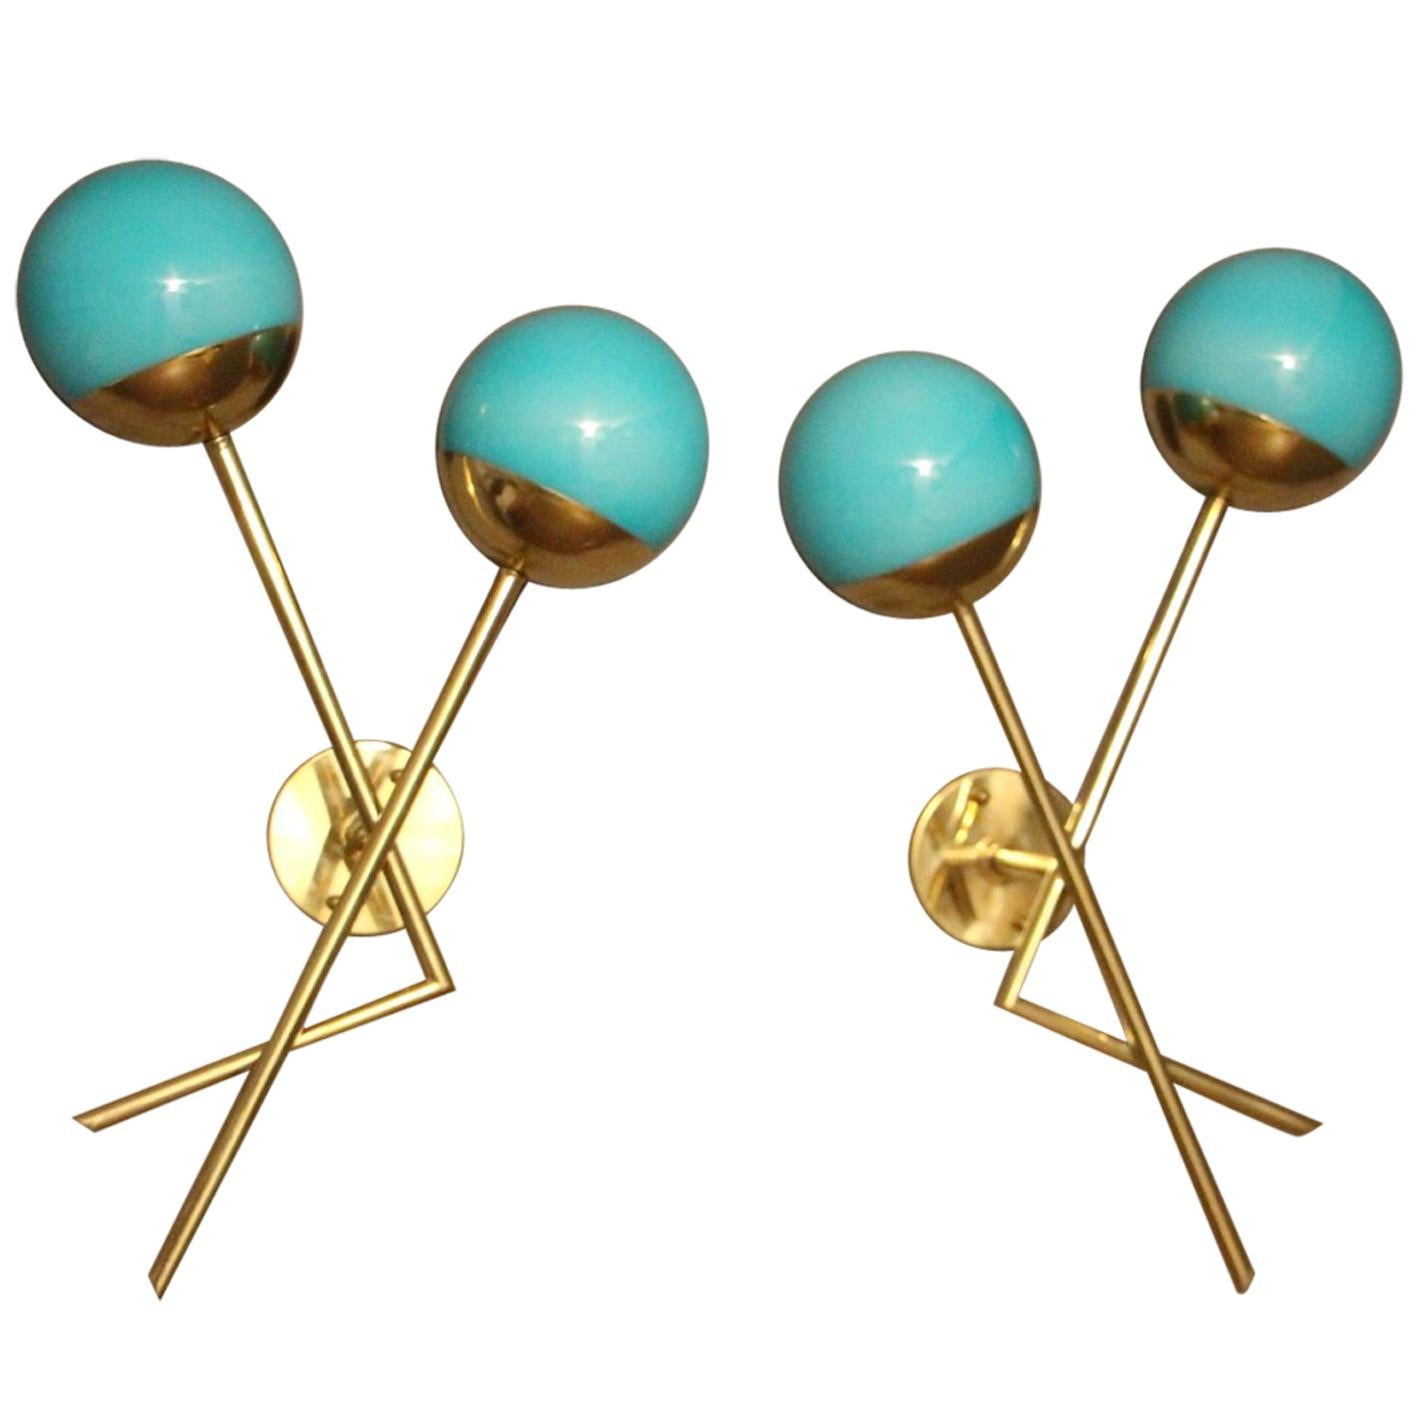 Pair of Italian Sconces in Turquoise Blue Murano Glass and Brass